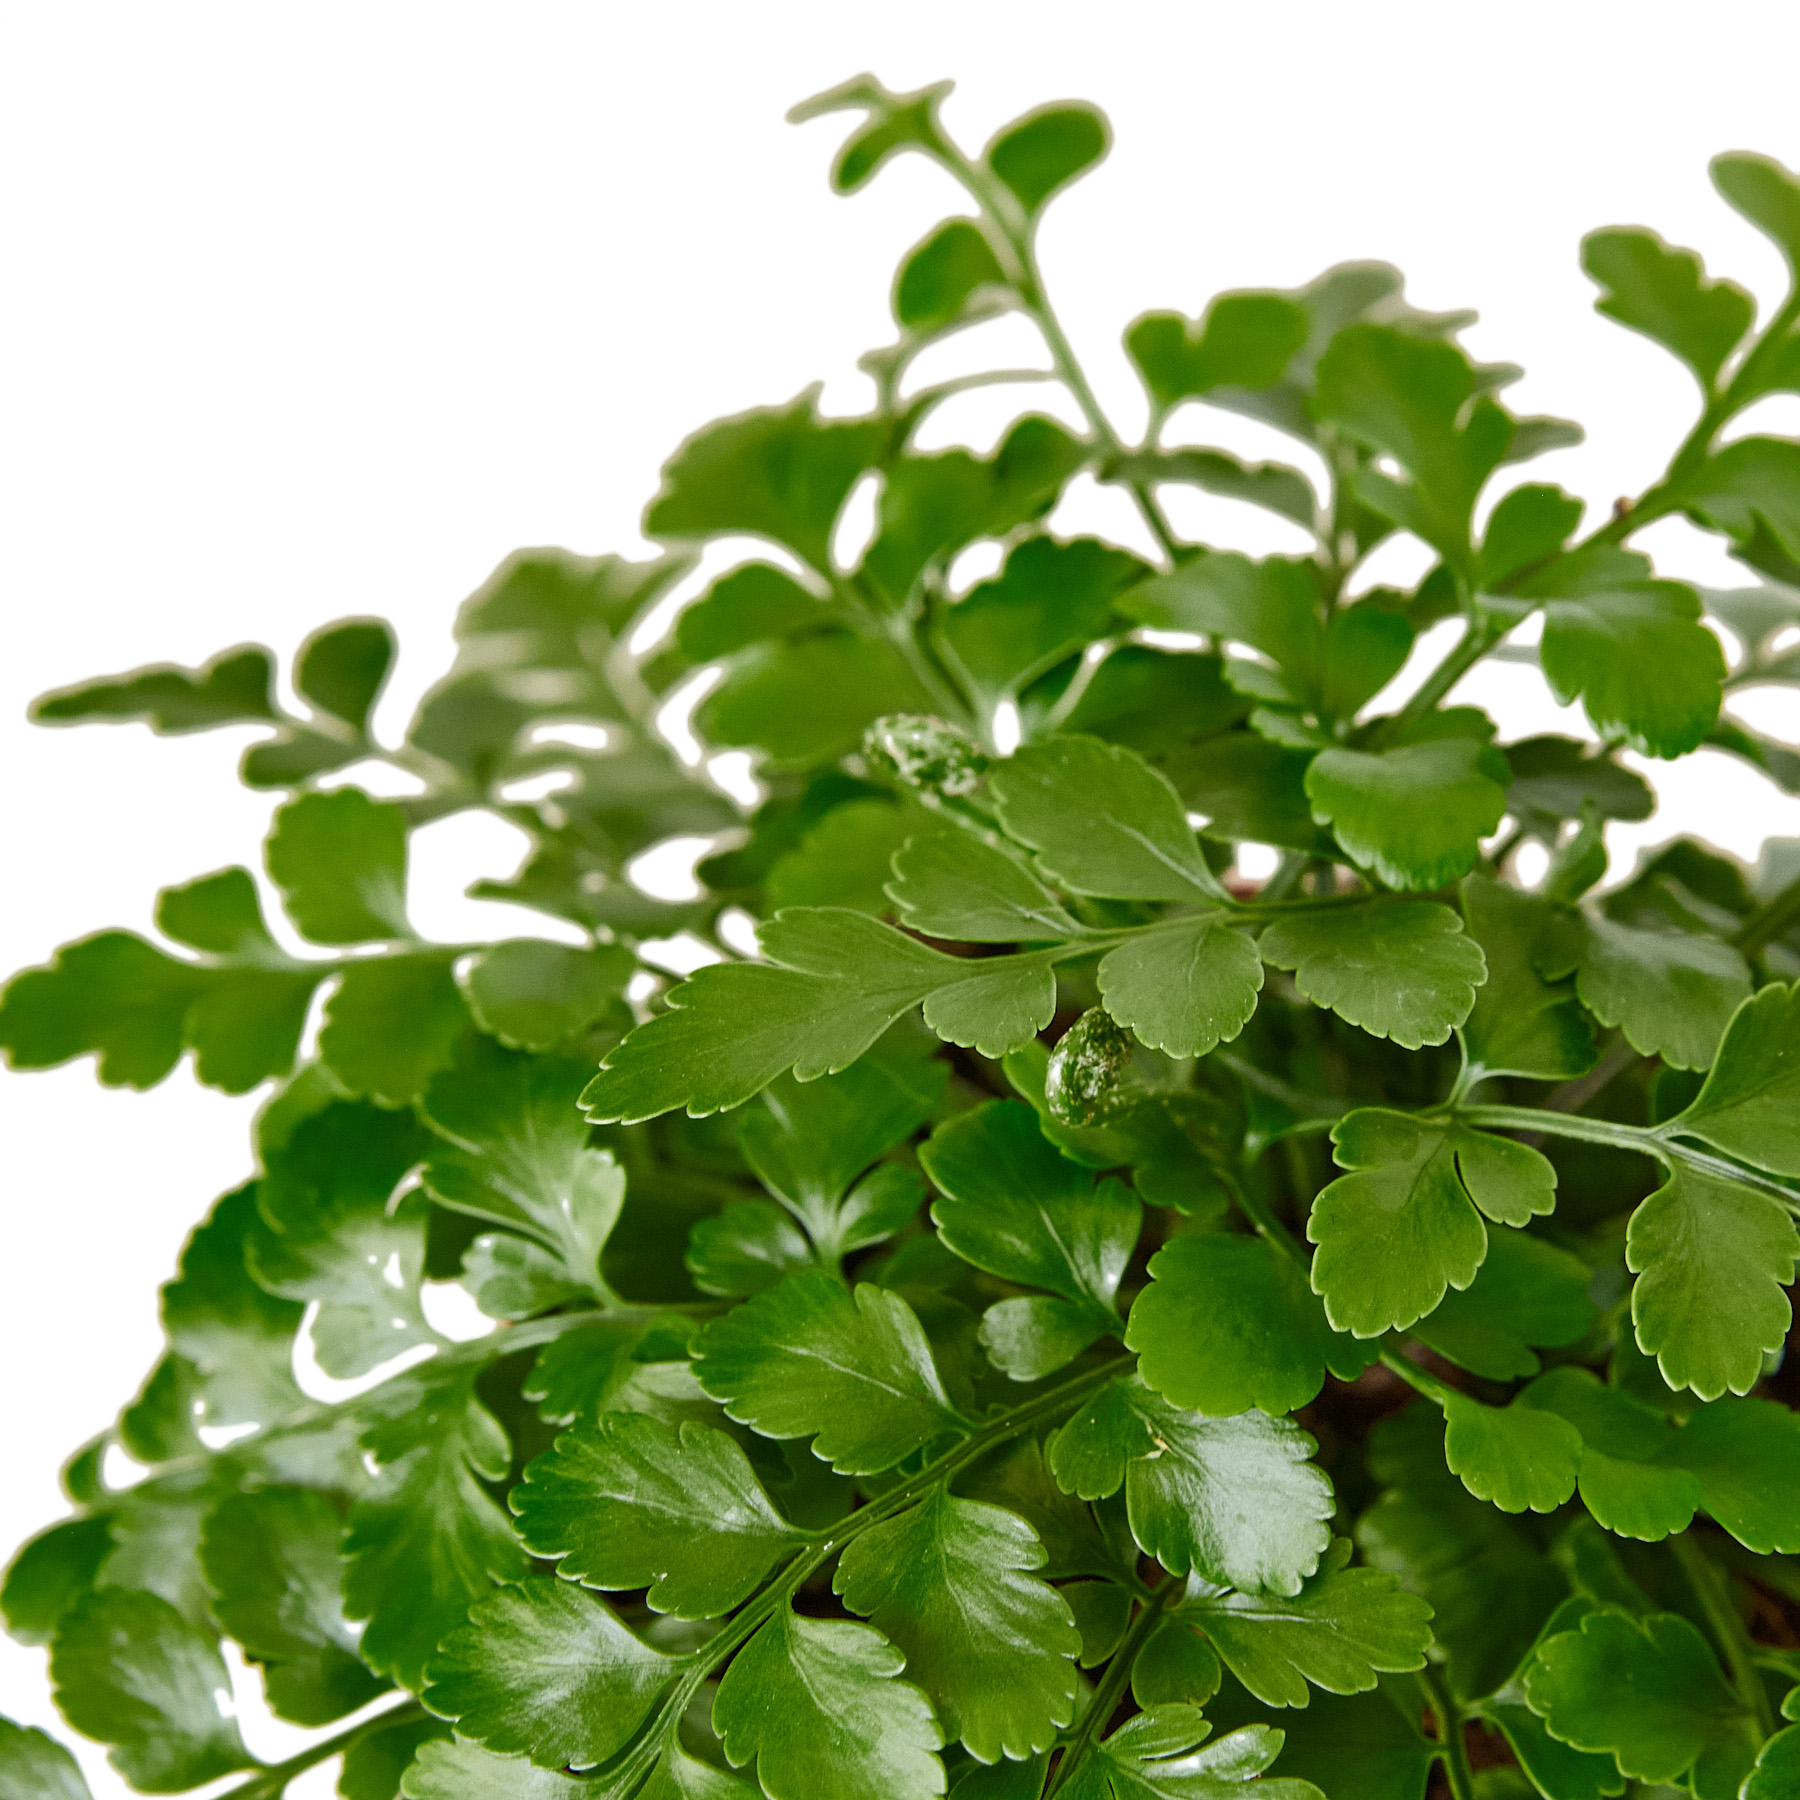 A vibrant close up of a plant with lush green leaves.